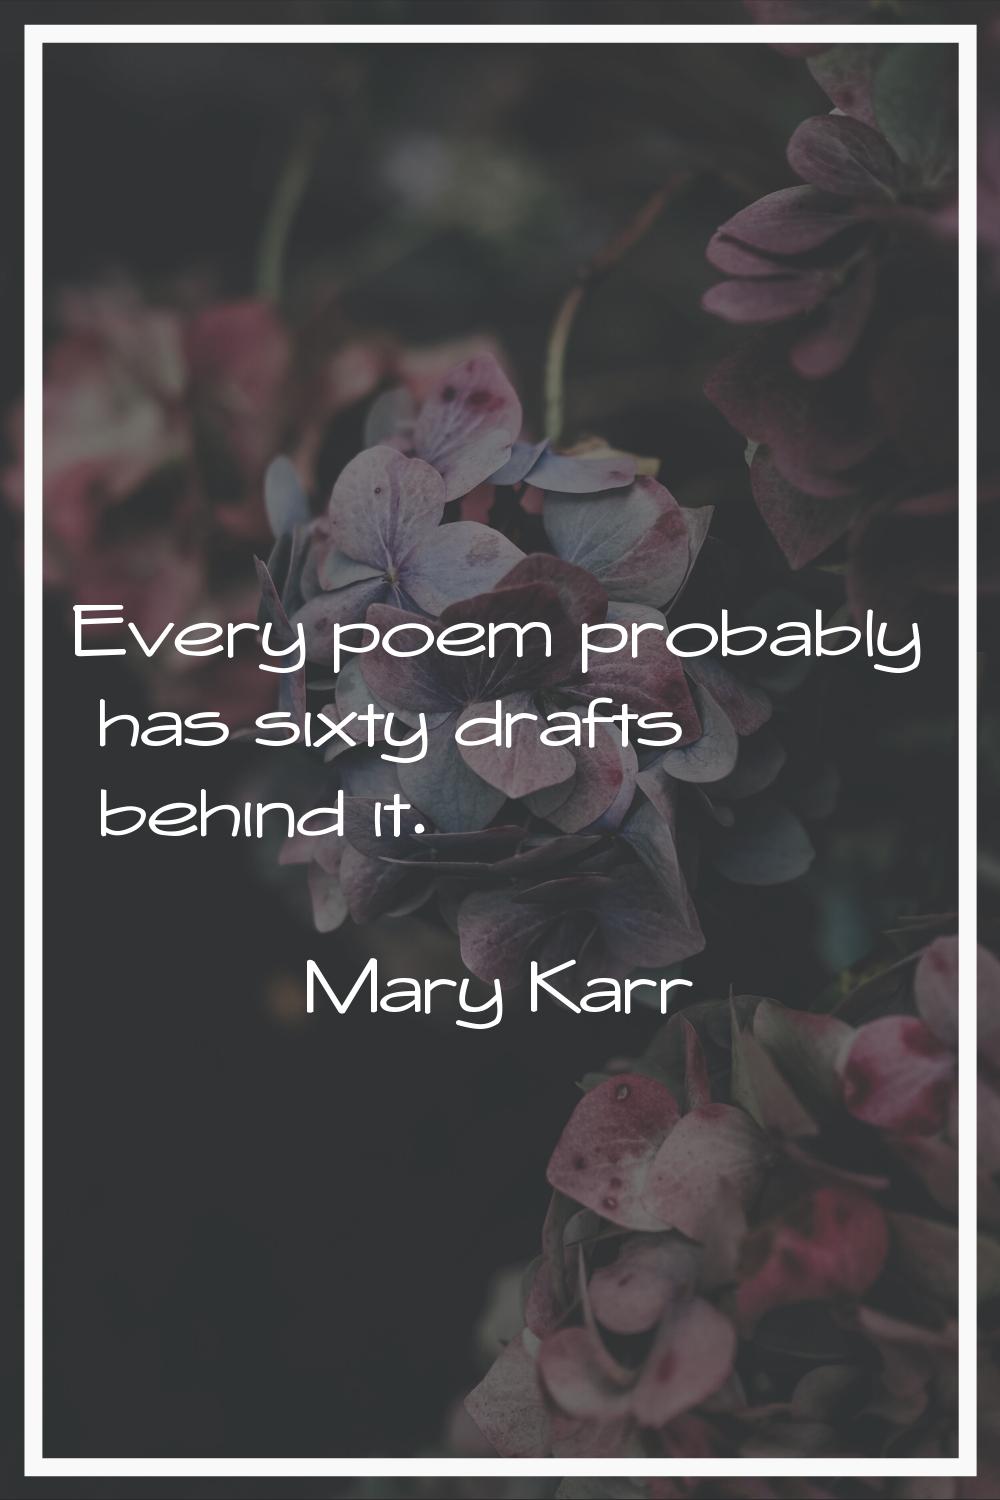 Every poem probably has sixty drafts behind it.